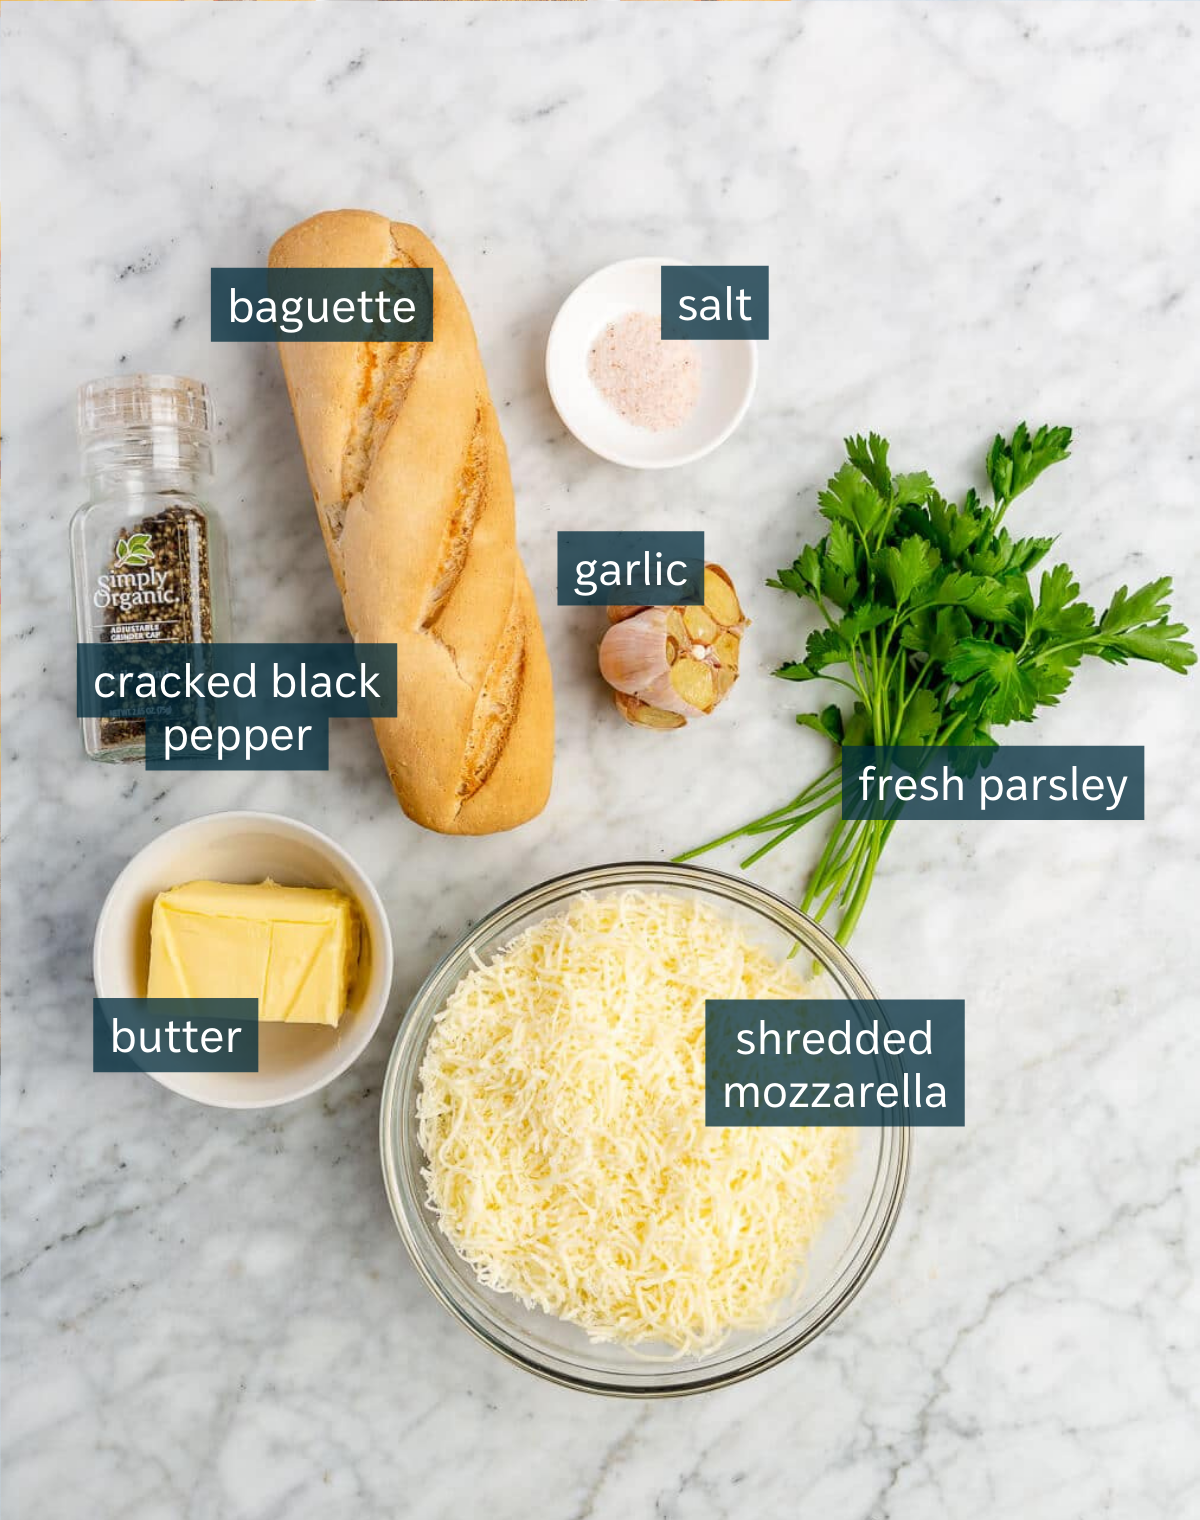 Ingredients used to make cheesy garlic bread sit on a marble counter.